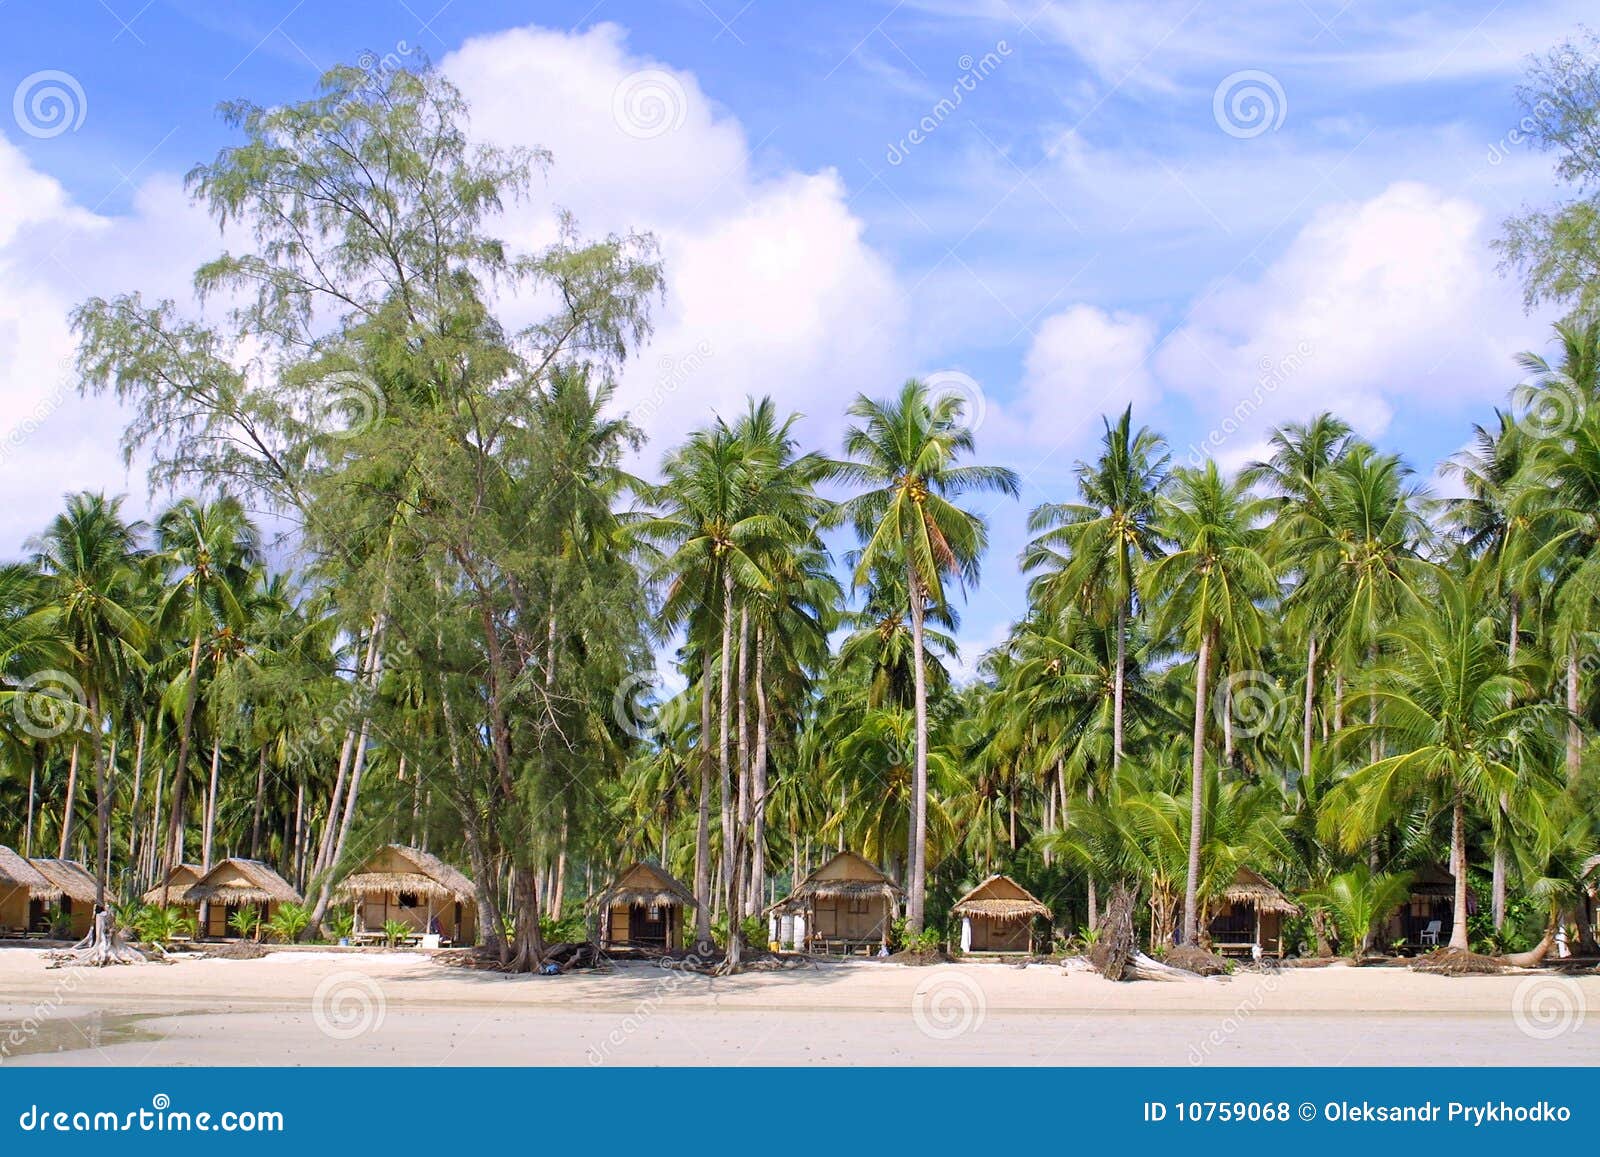 Huts and Coconut palms stock photo. Image of asia, stem - 10759068